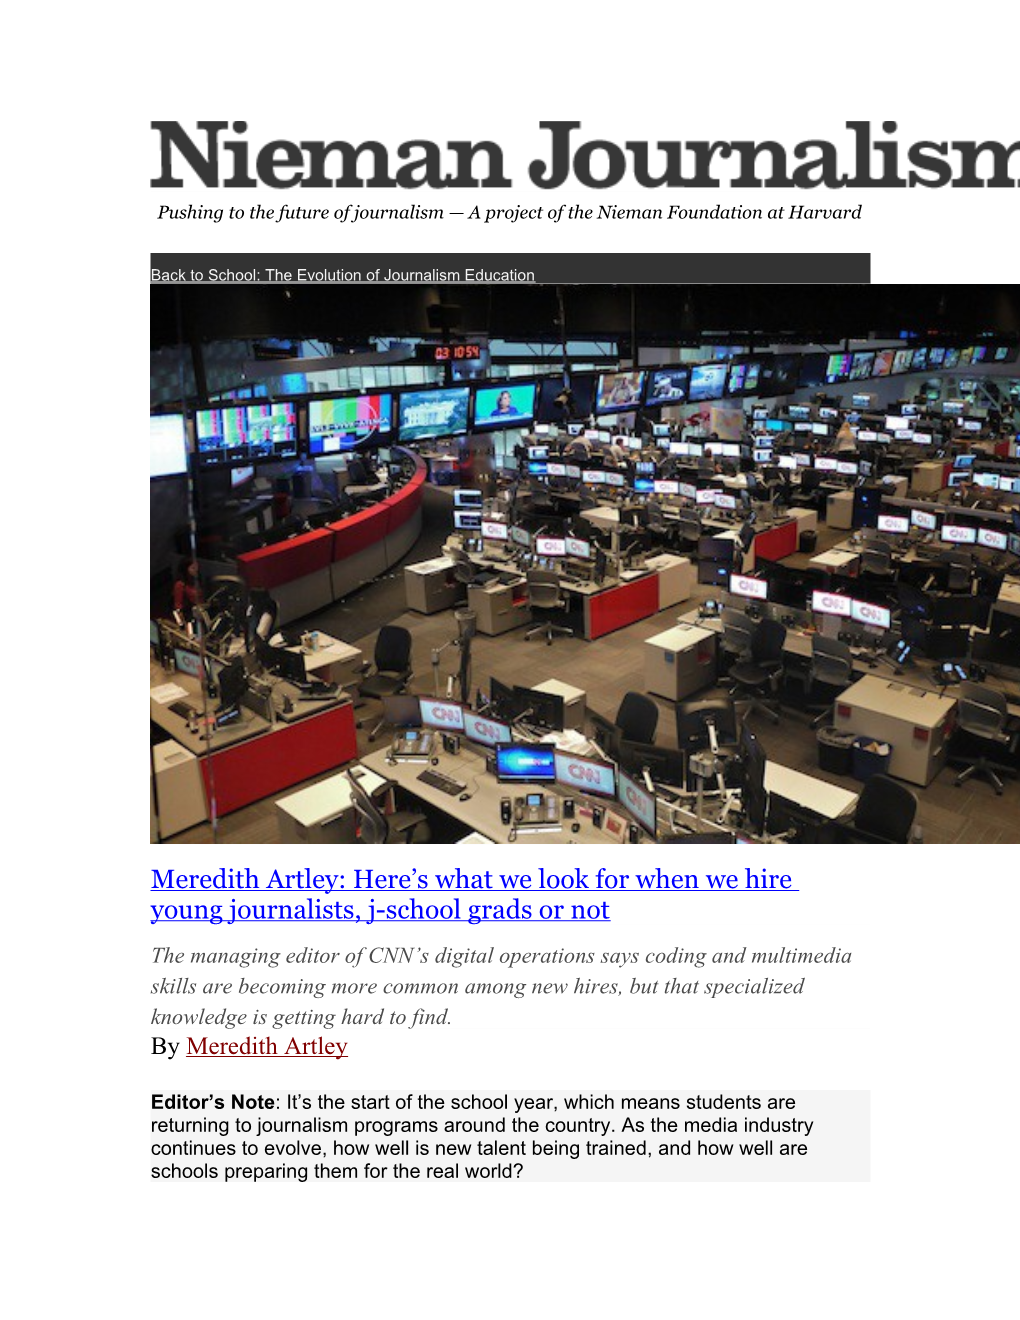 Pushing to the Future of Journalism a Project of the Nieman Foundation at Harvard